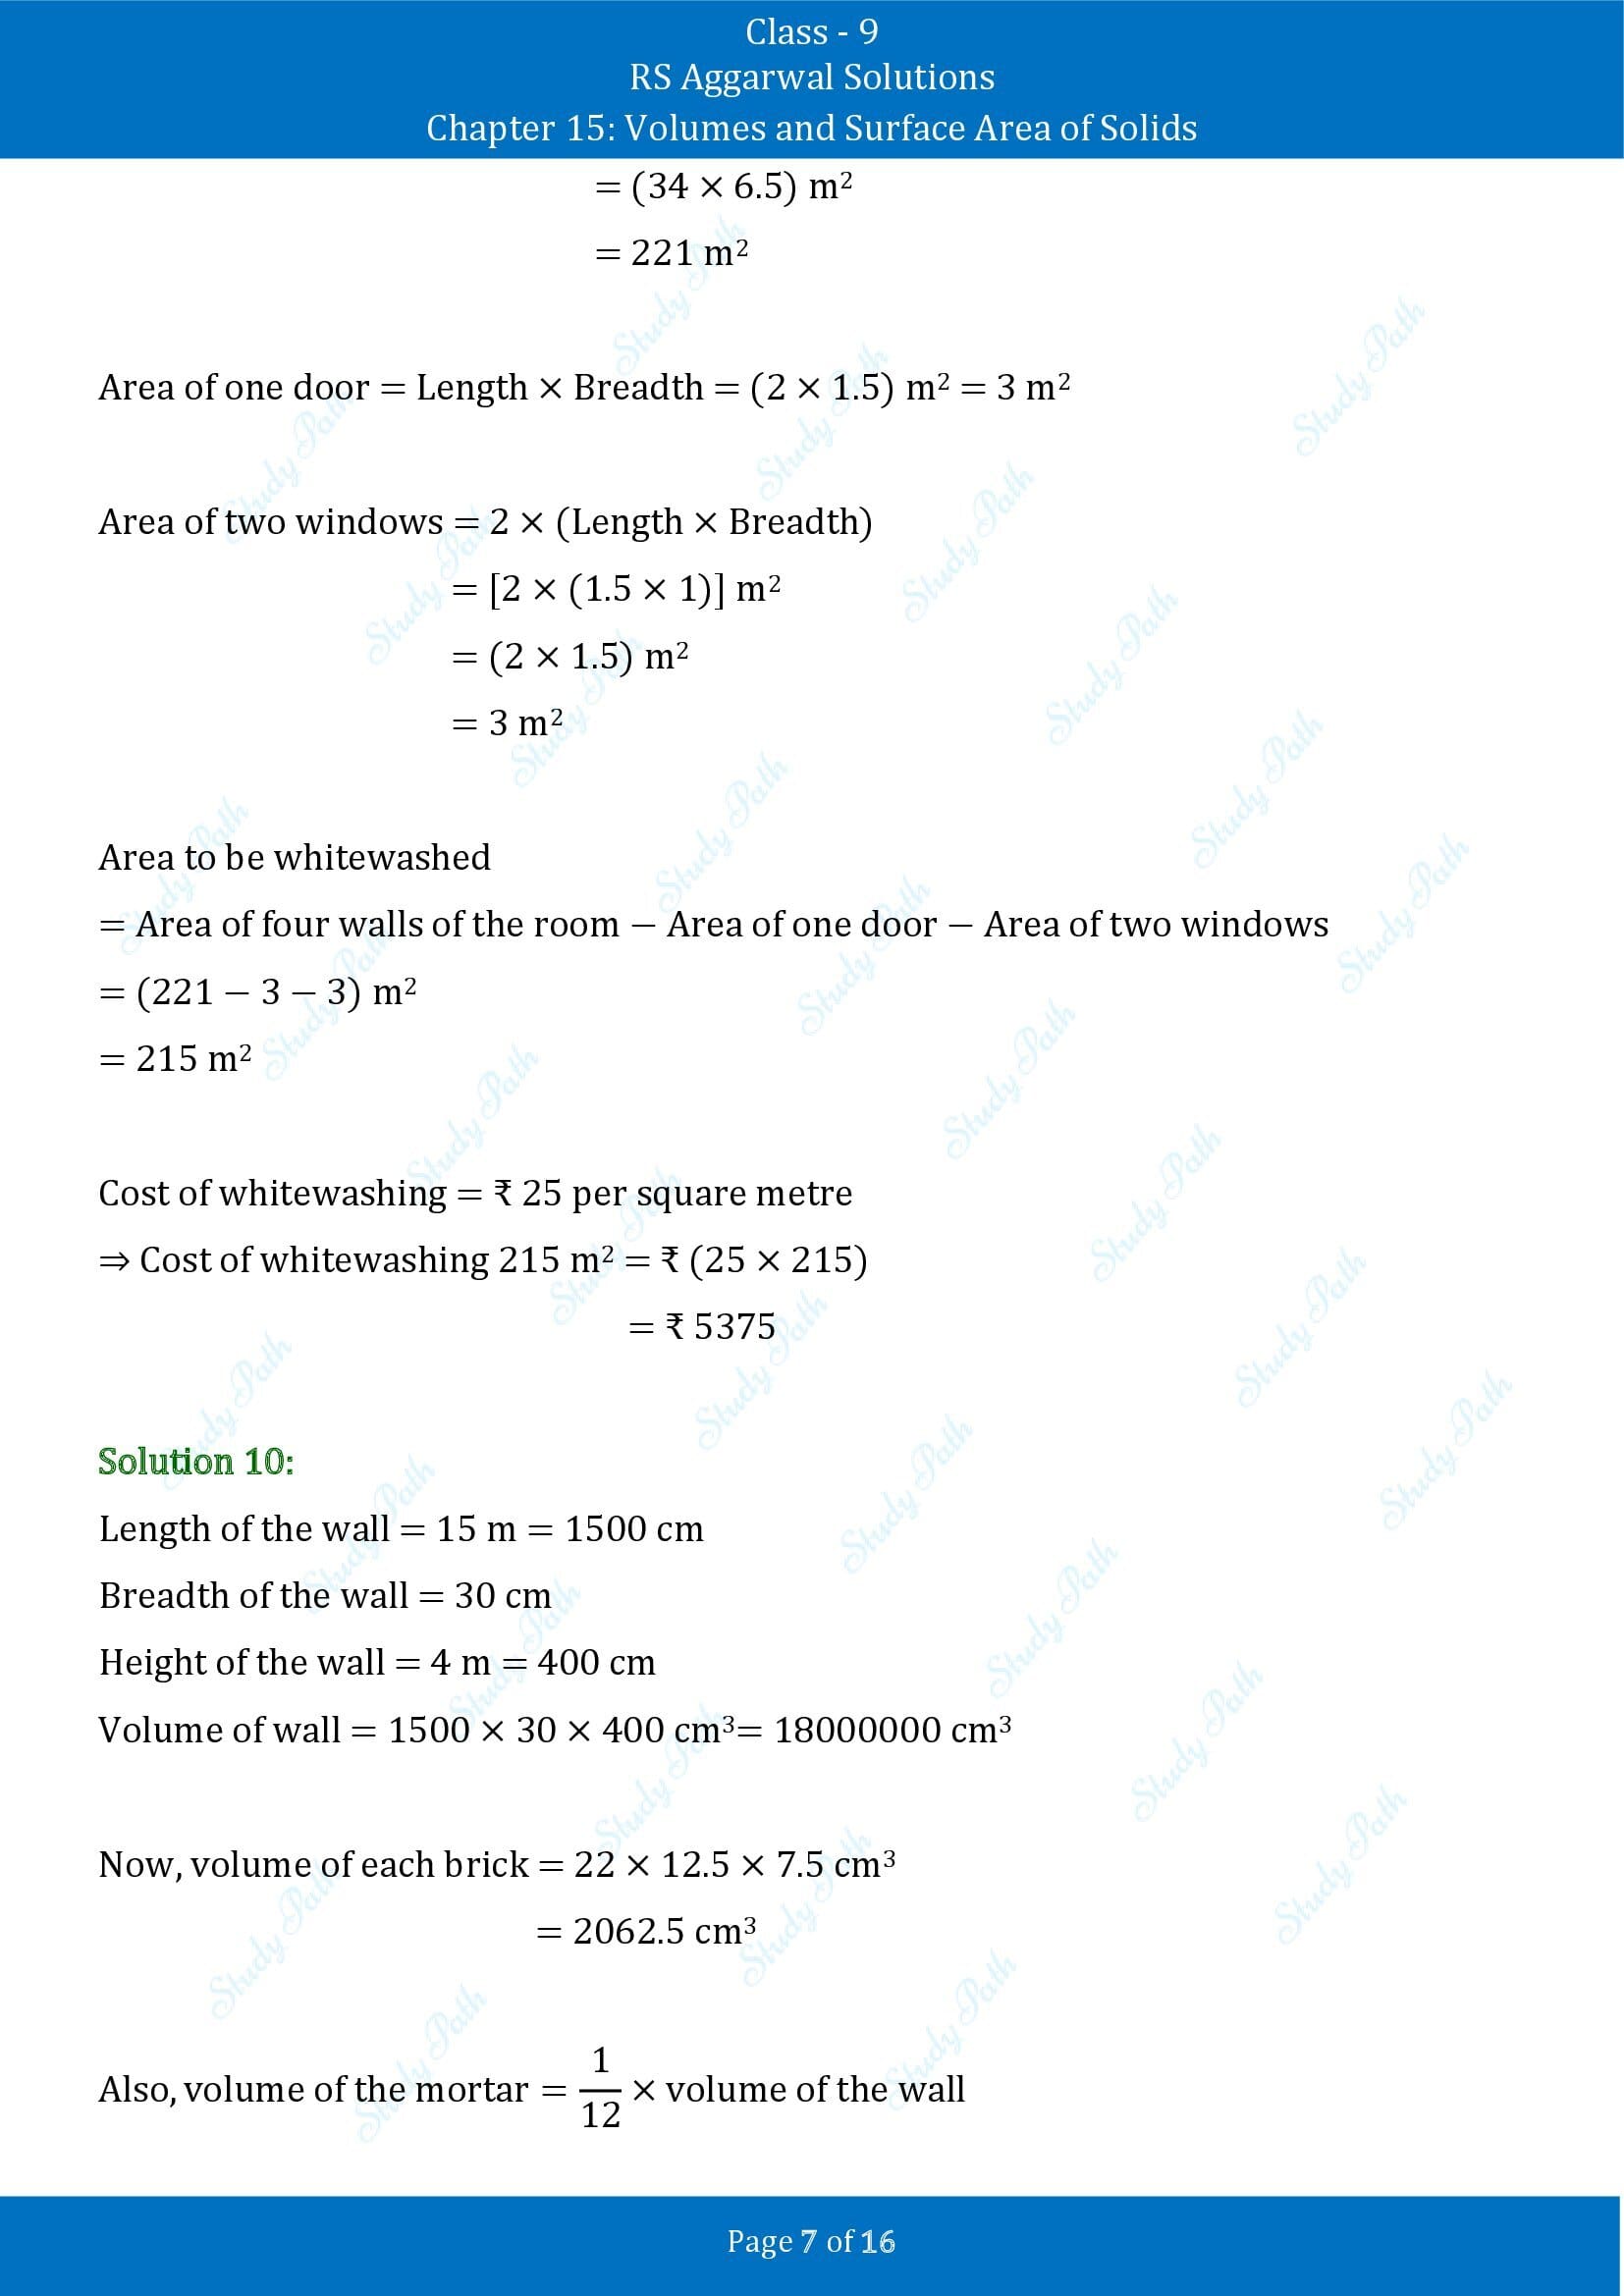 RS Aggarwal Solutions Class 9 Chapter 15 Volumes and Surface Area of Solids Exercise 15A 00007